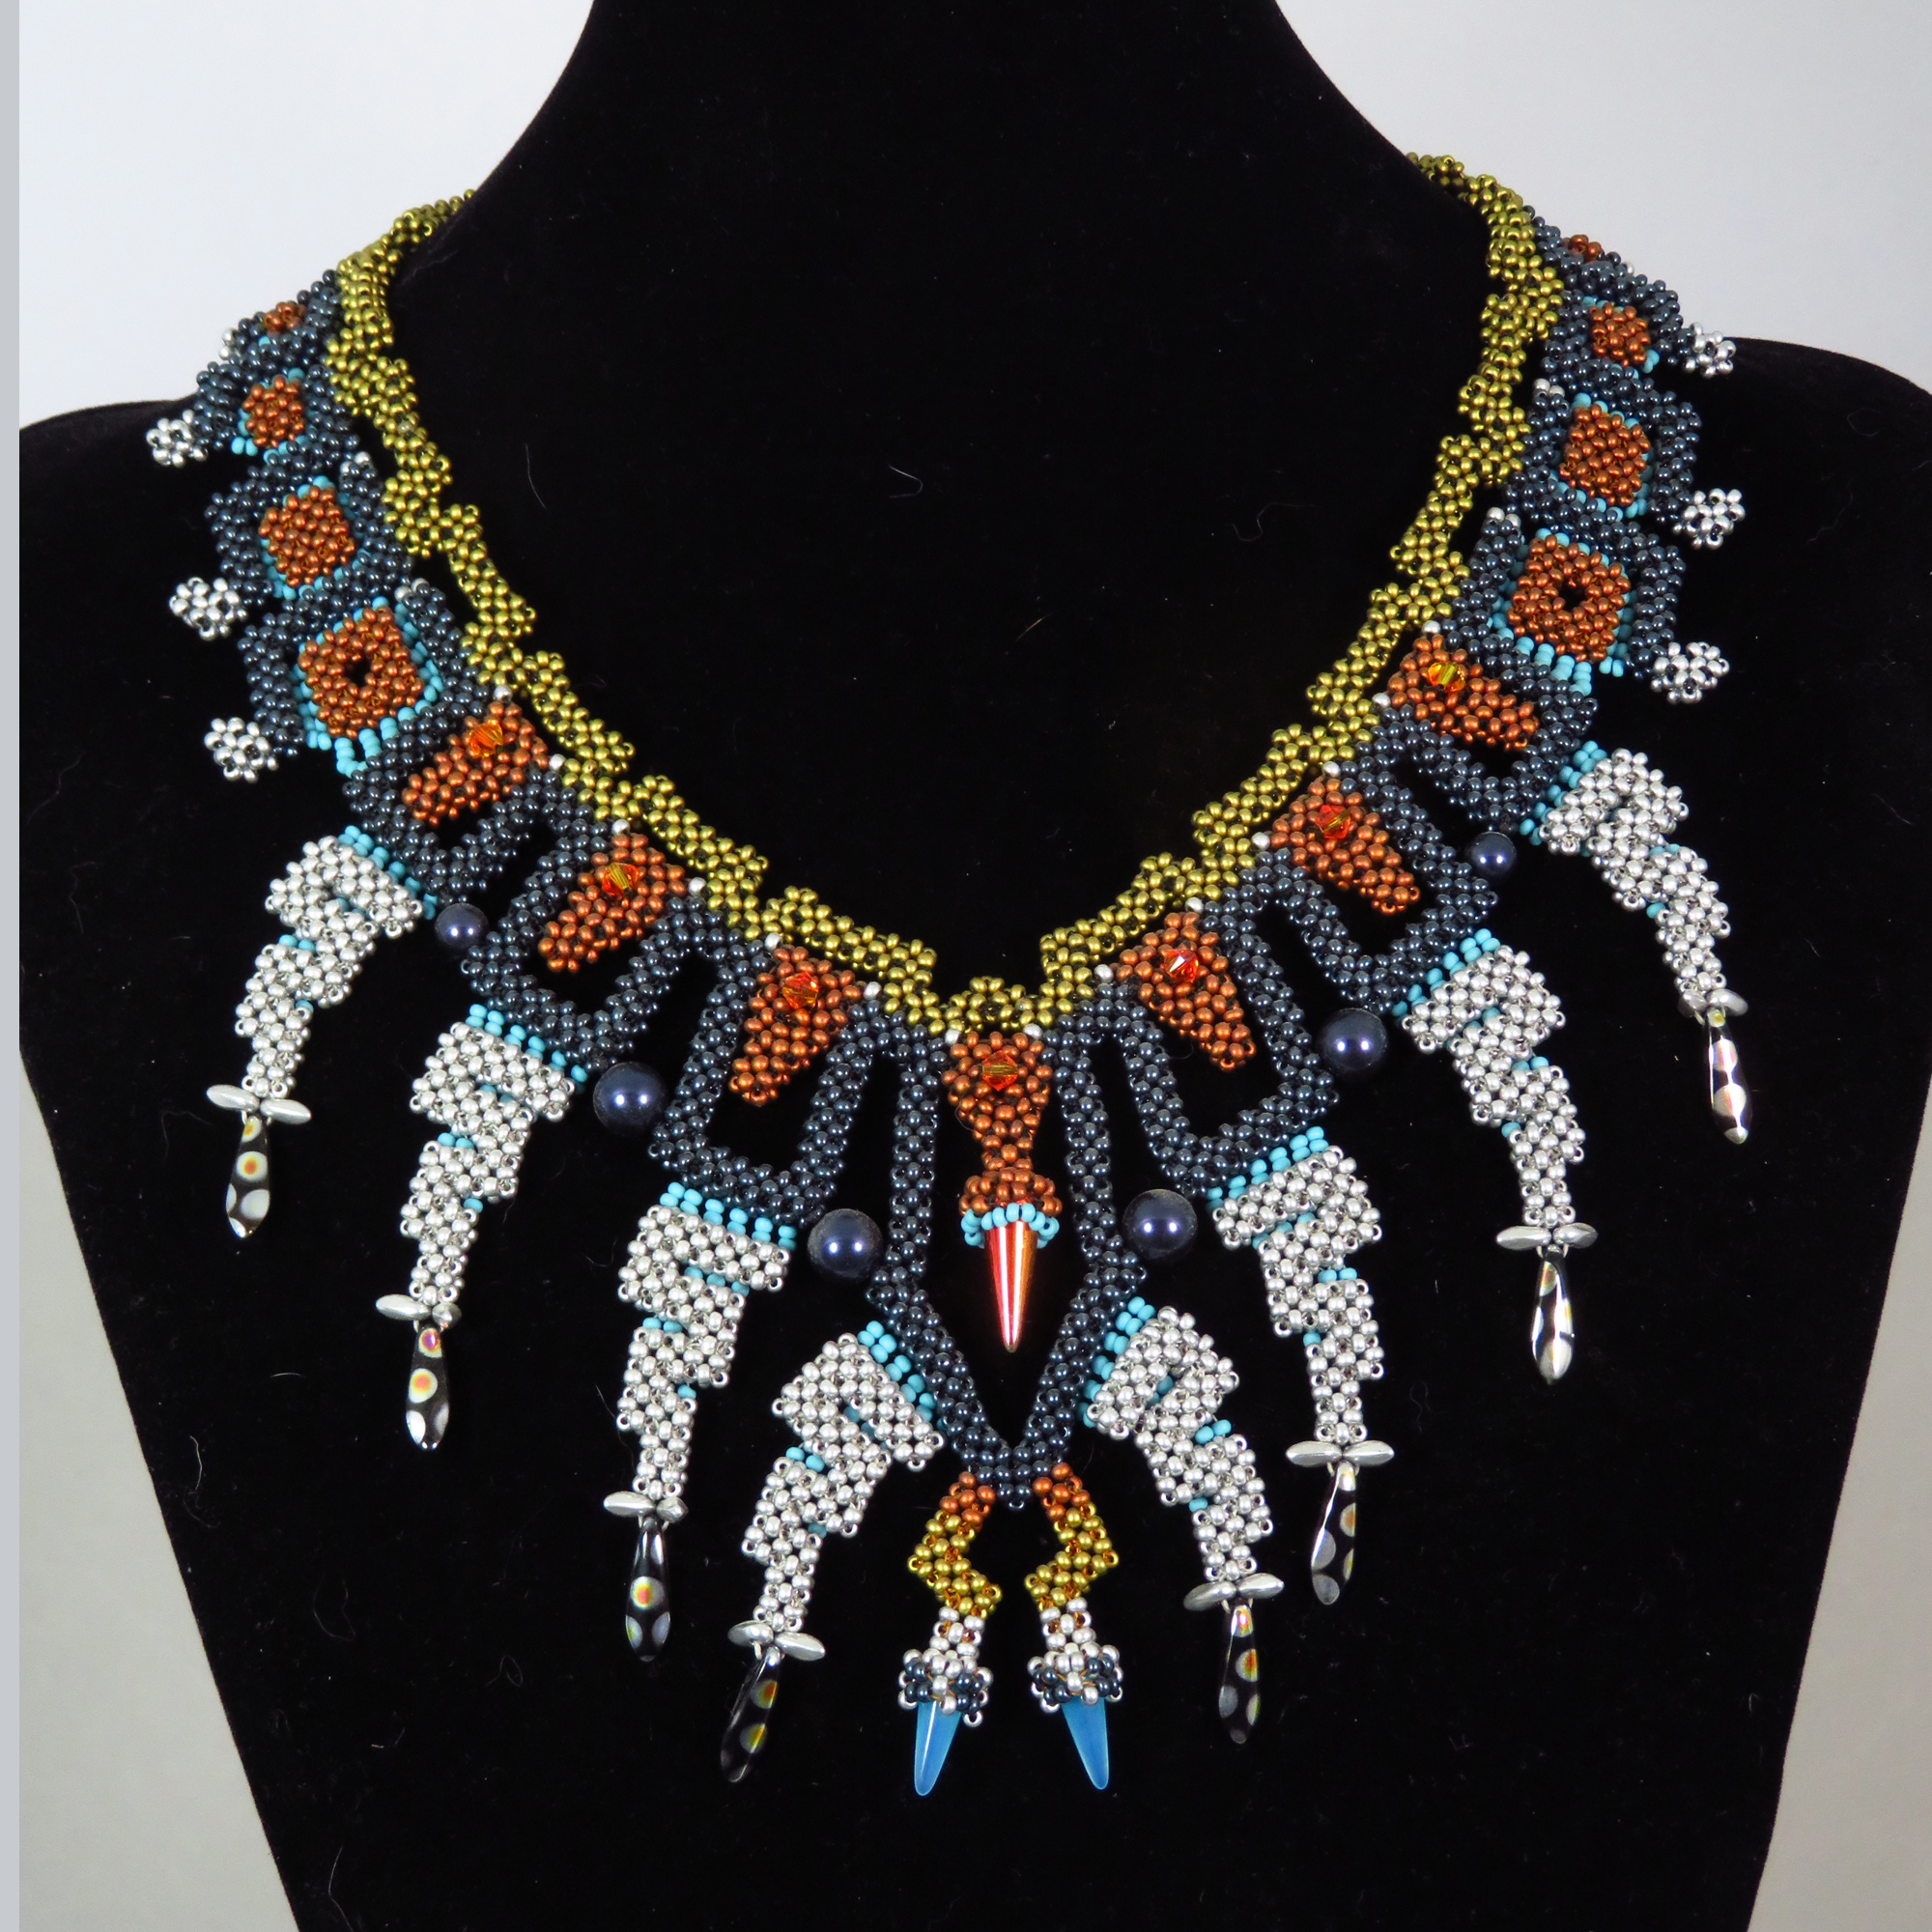 Beaded Art Deco Mayan Fireworks Necklace by Bonnie Van Hall